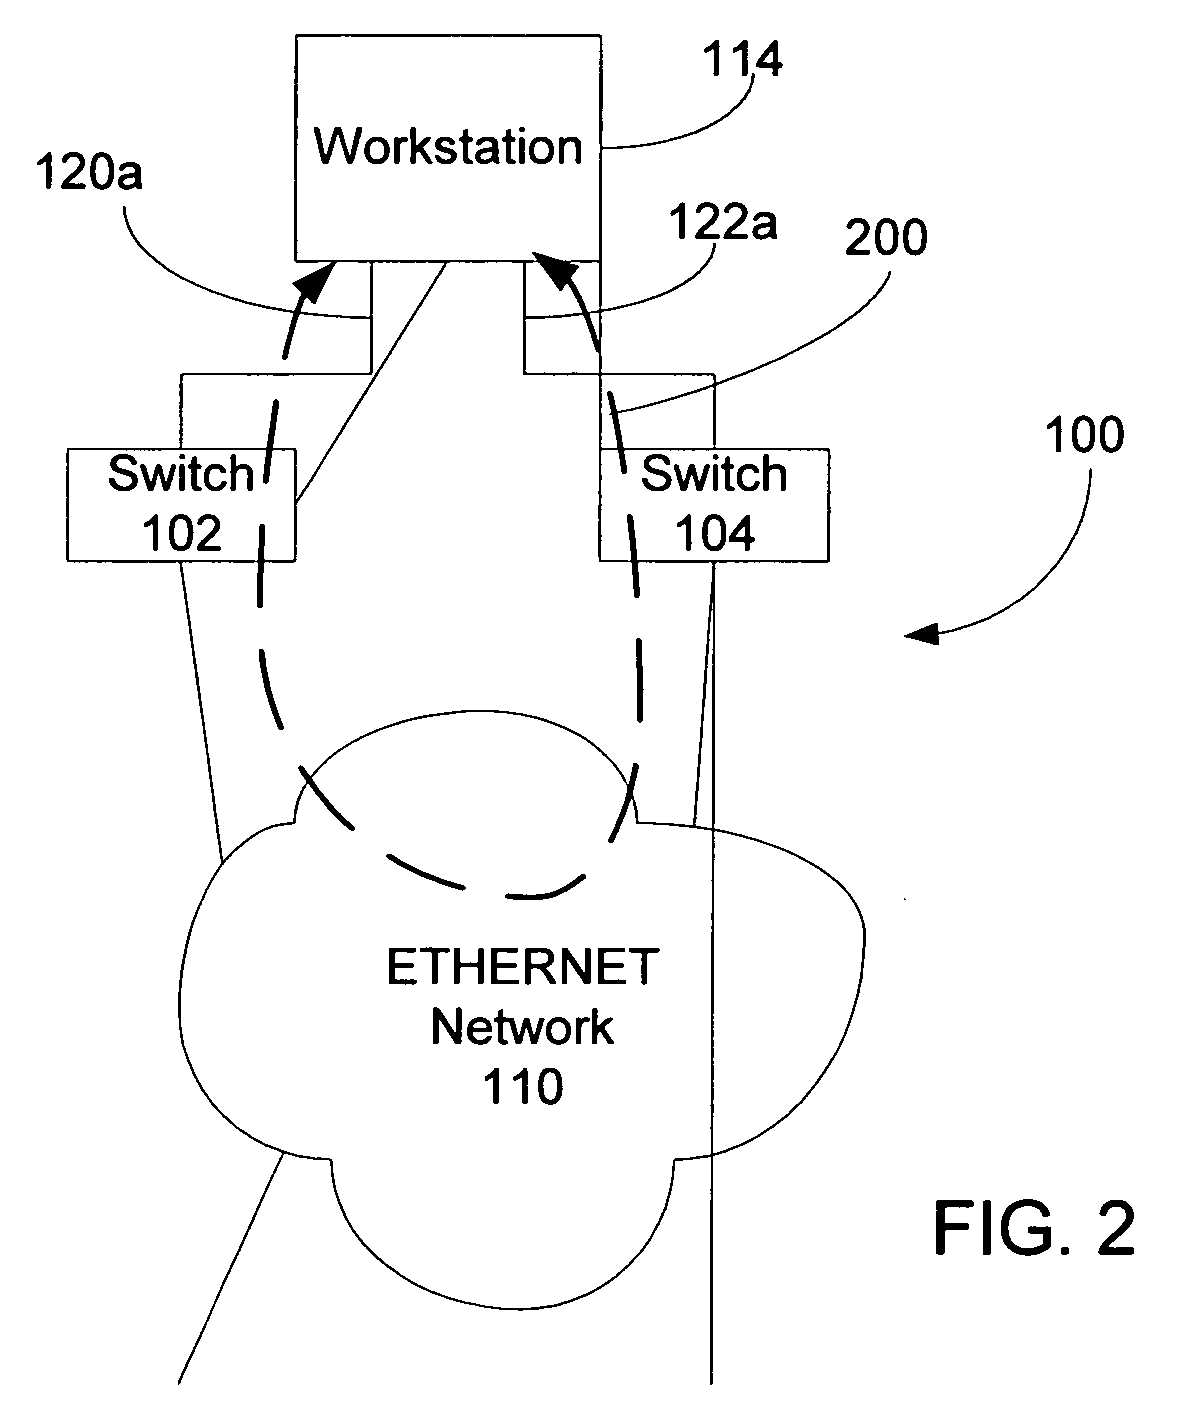 Selecting one of multiple redundant network access points on a node within an industrial process control network